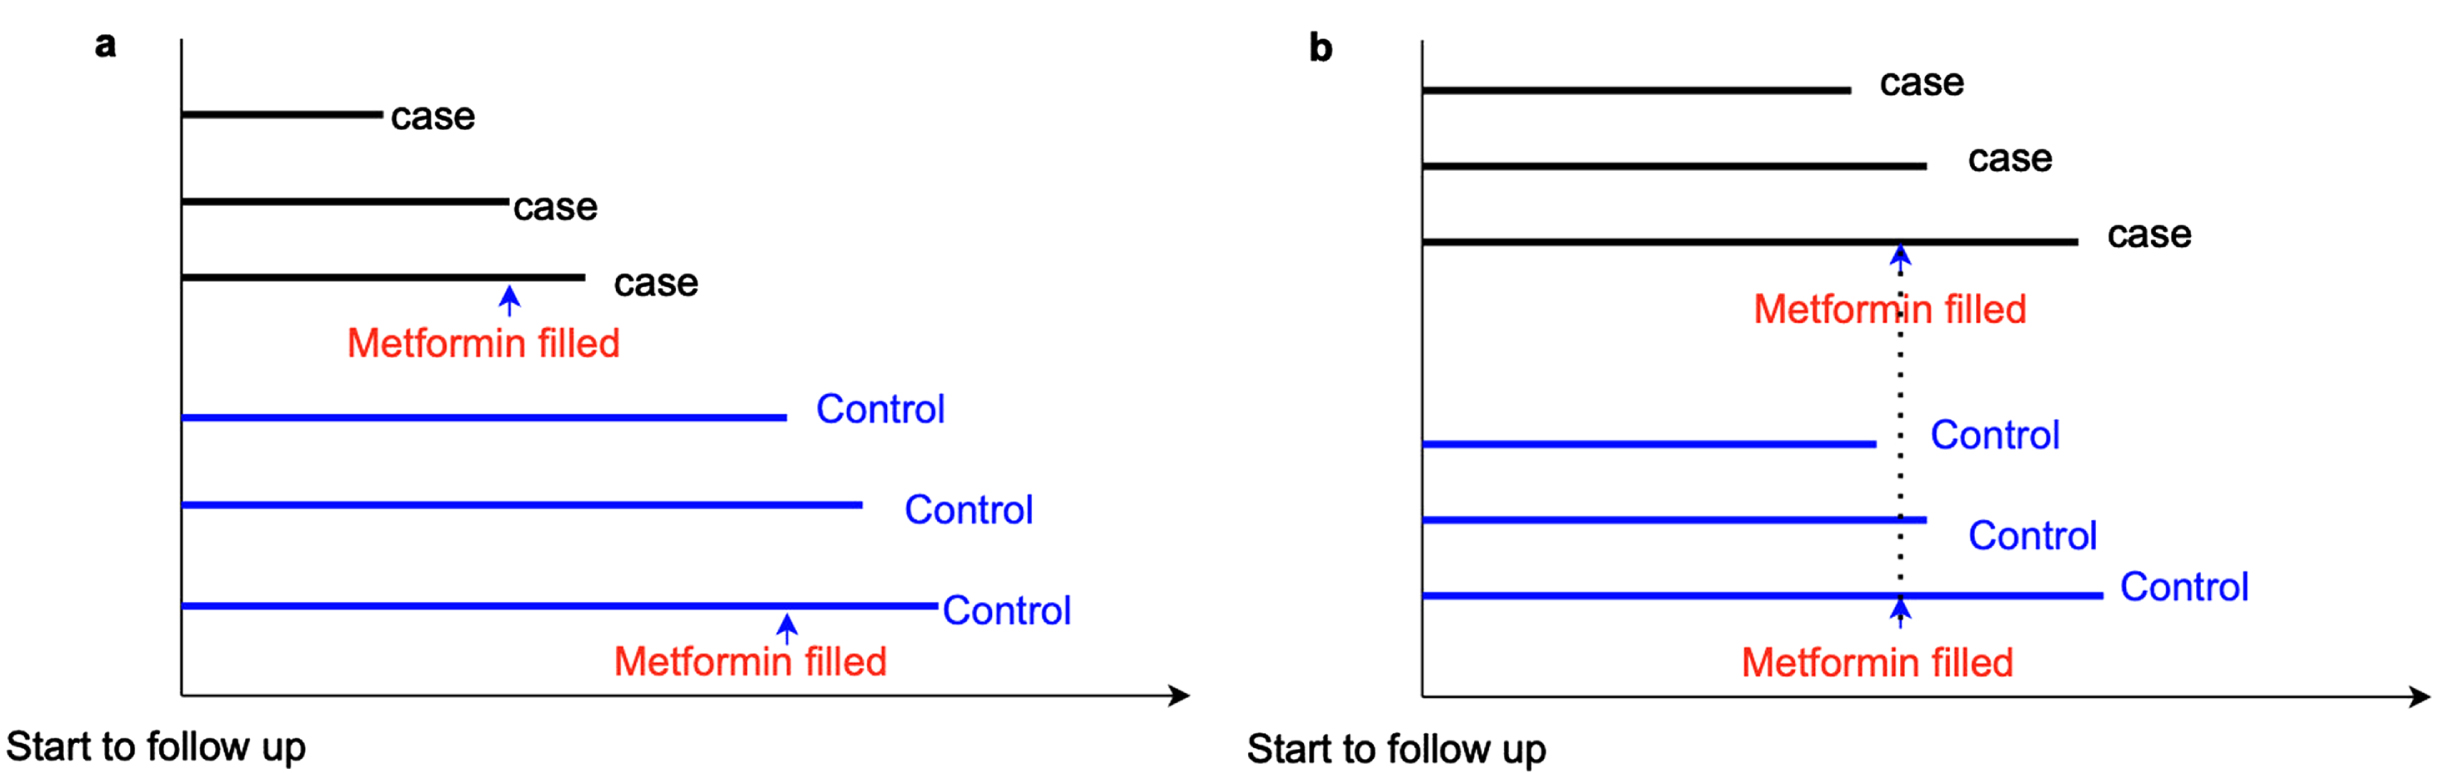 Time window bias. a) In a case-control study, cases have a shorter time window of metformin exposure than controls, which indicates controls have a greater opportunity to receive metformin prescriptions than cases. Thus, time-window bias occurs, and it can bias the results to show metformin has a protective effect on dementia risk. b) Time-window bias can be addressed in case-control studies if cases and controls have the same exposure opportunity time.